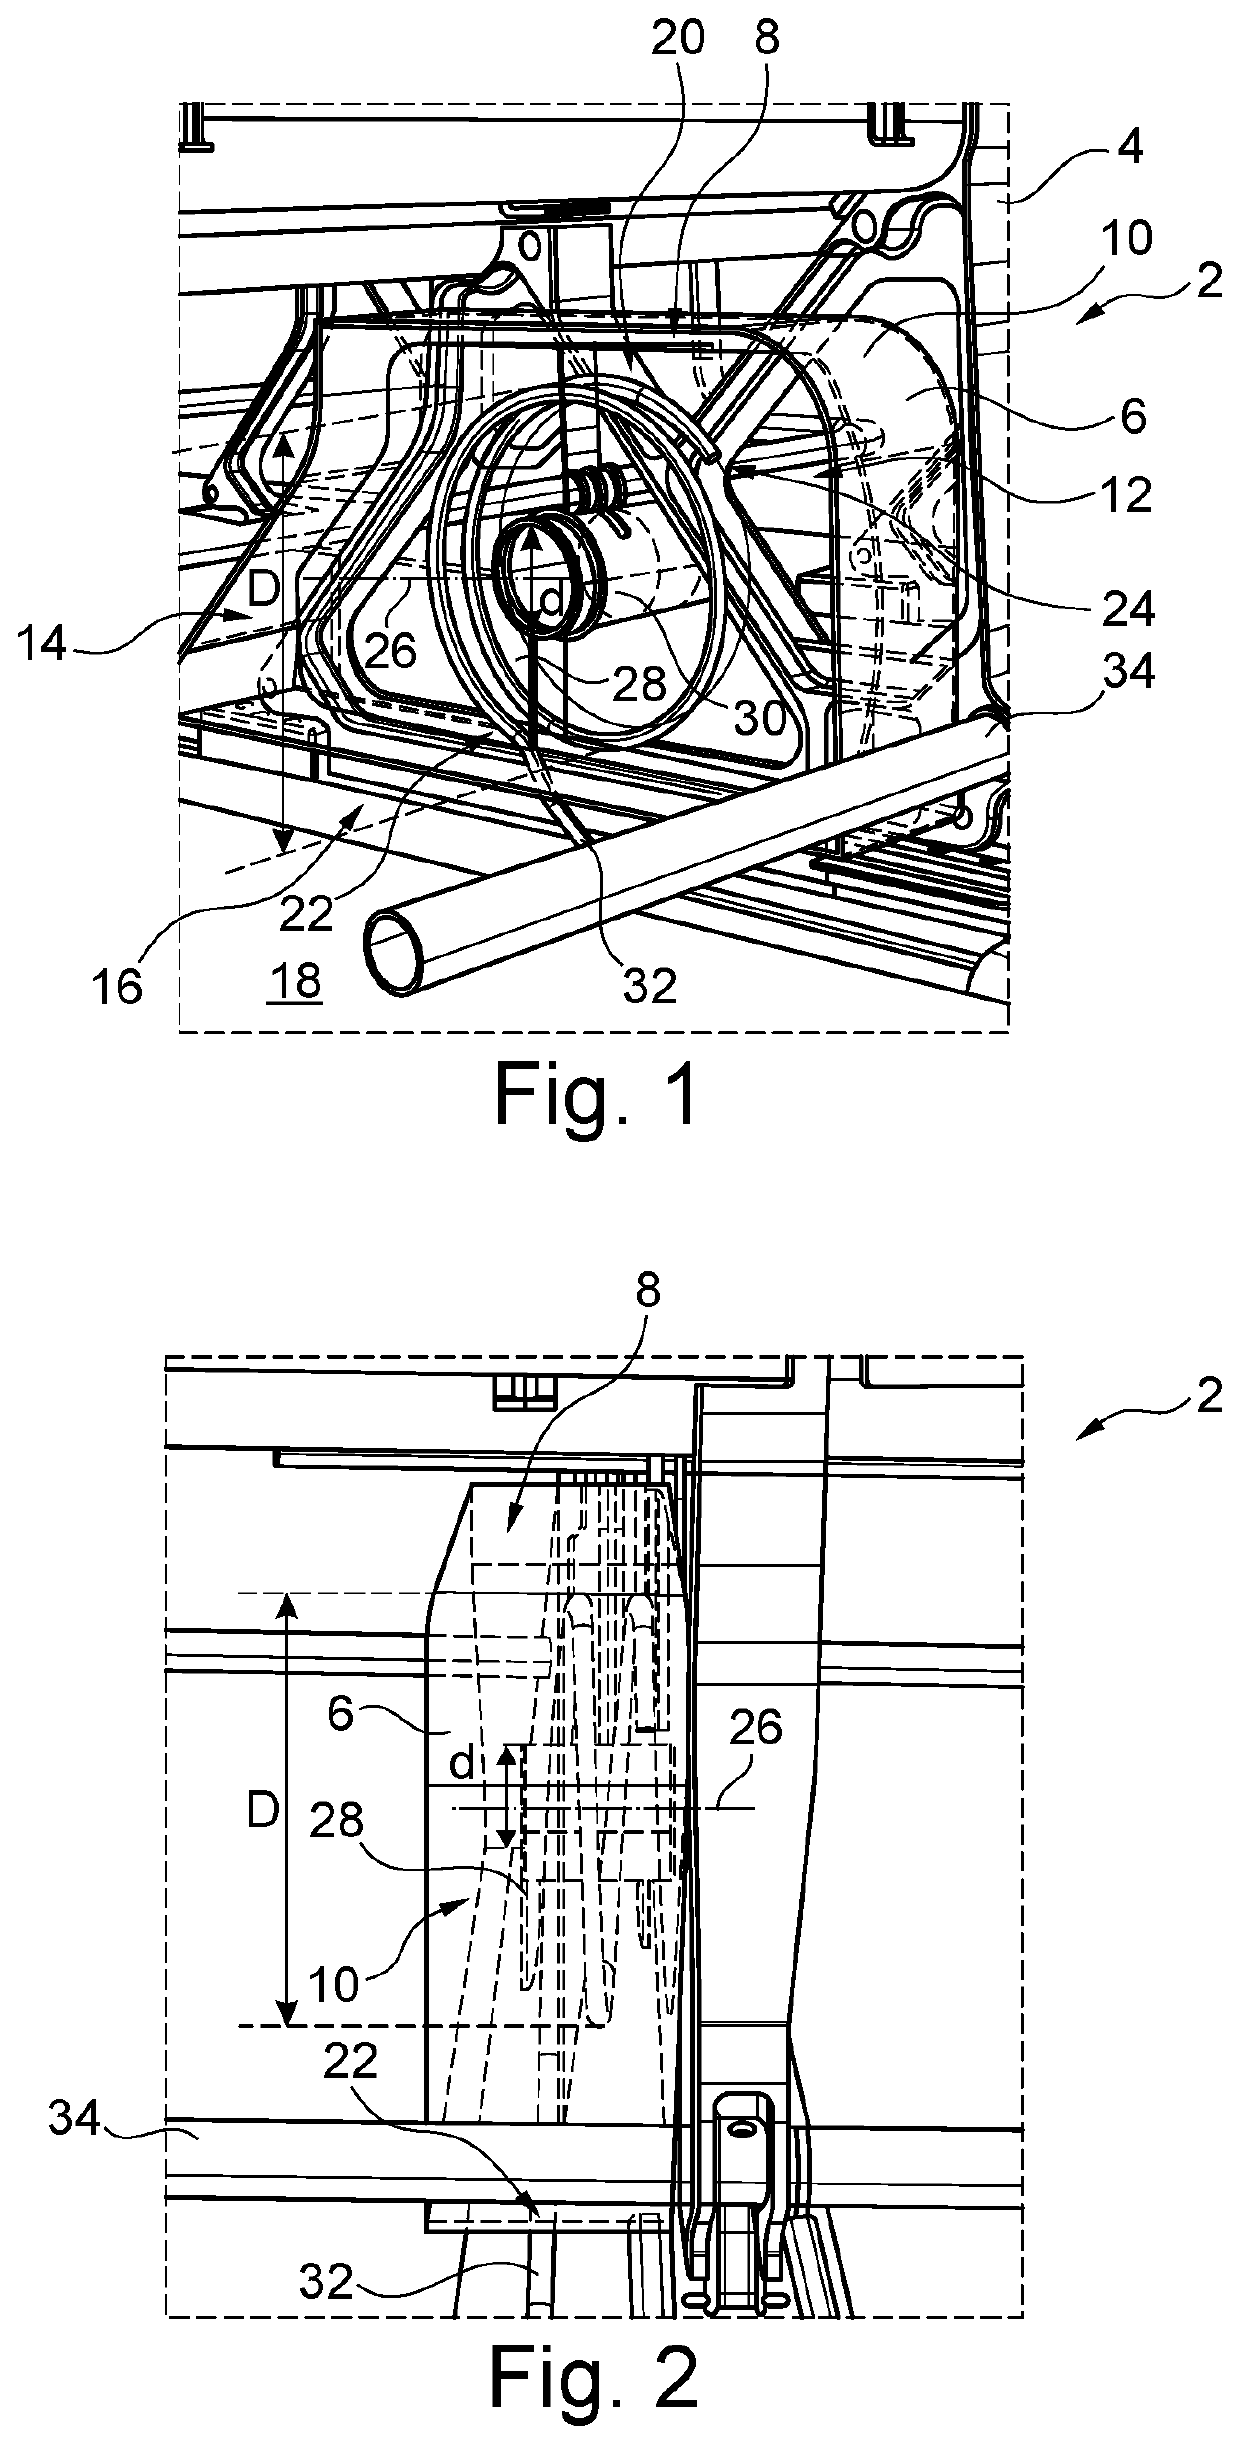 Connection system for electrically connecting a fixture in a vehicle